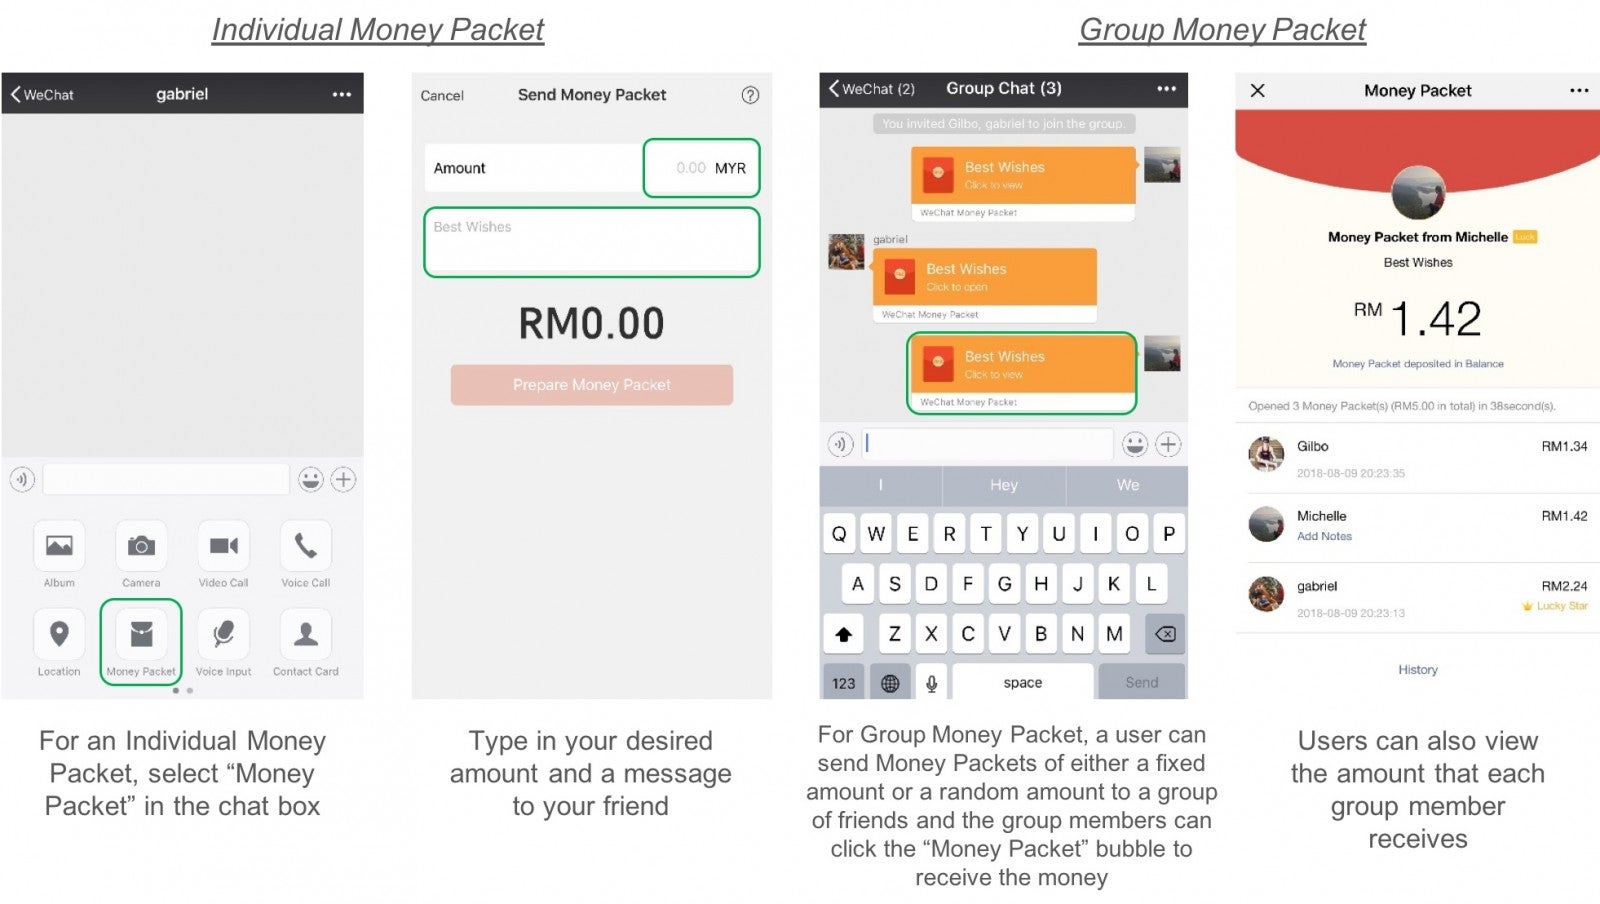 [Test] Here's How M’sians Can Get Up to RM88.88 Free Money by Just Using This ONE App! - WORLD OF BUZZ 4